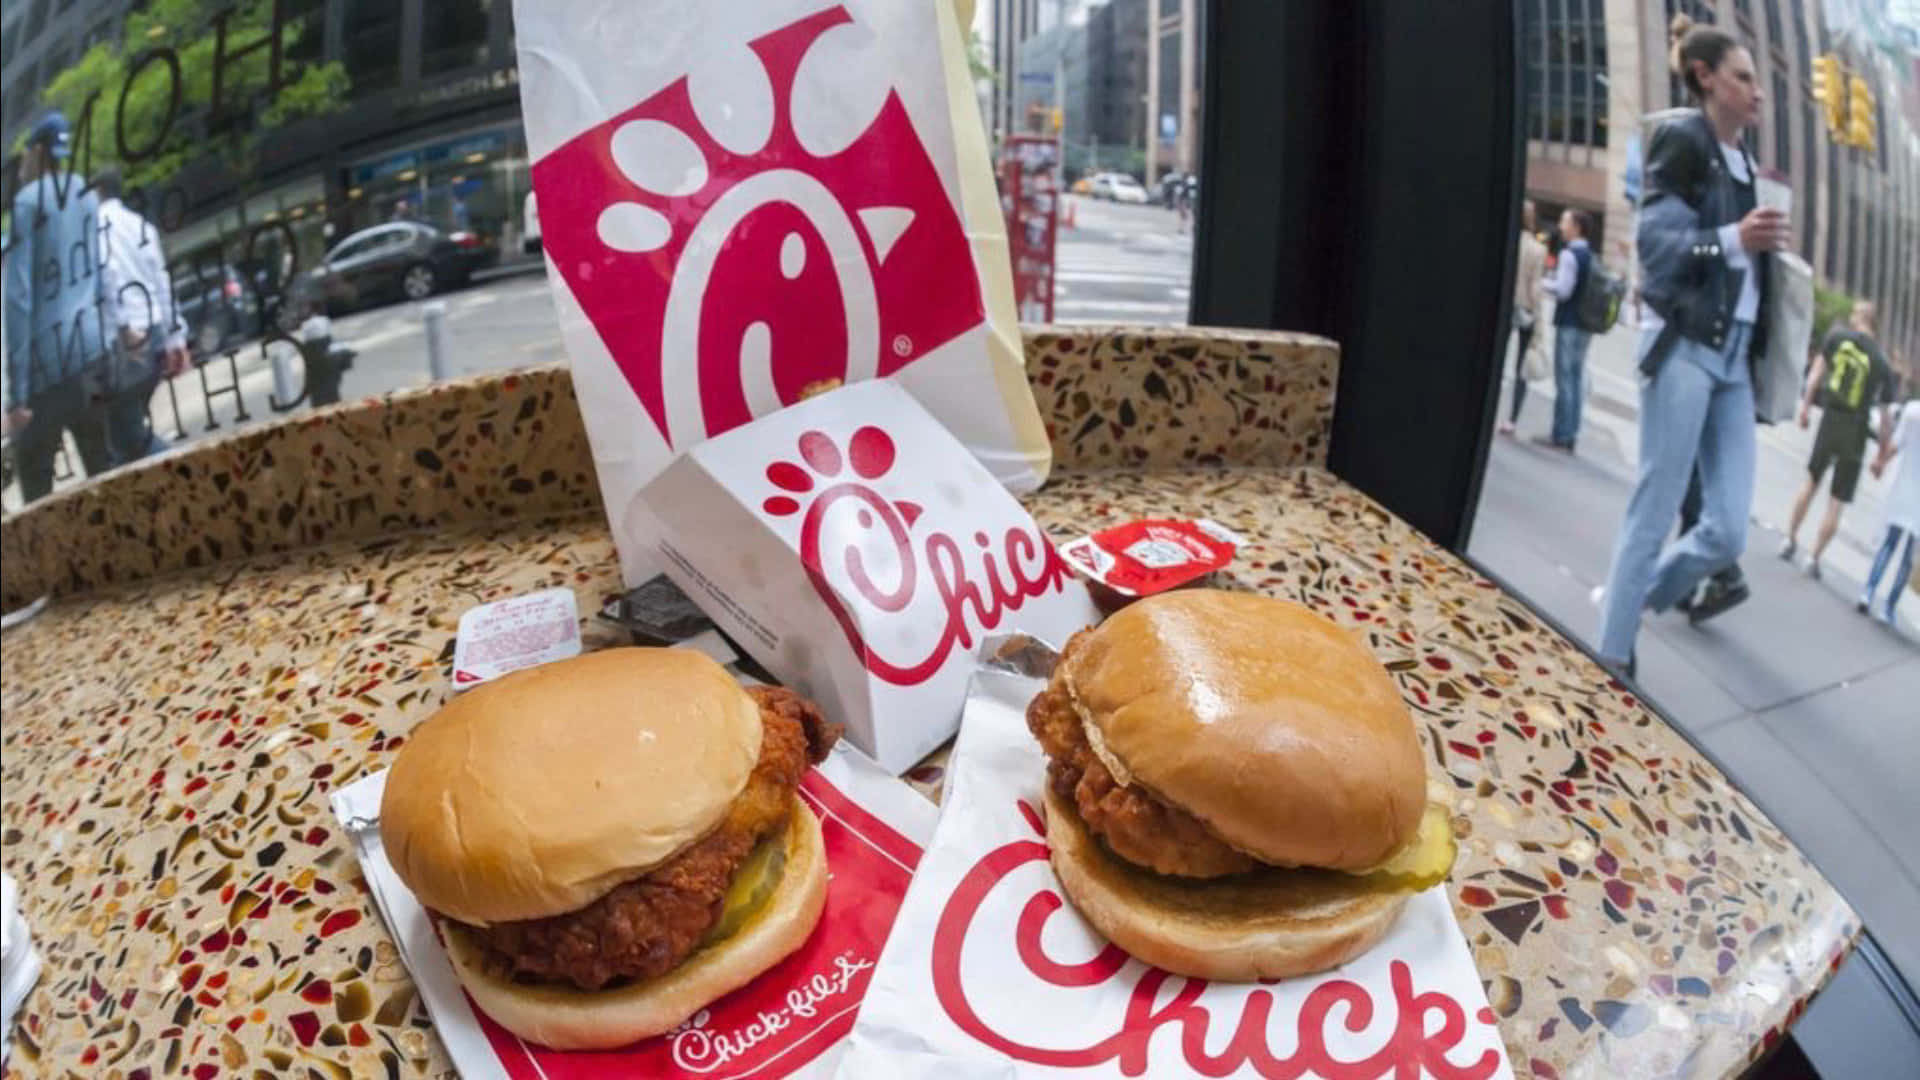 Chick-fil-a Is A Fast Food Chain That Has Been Expanding In New York City